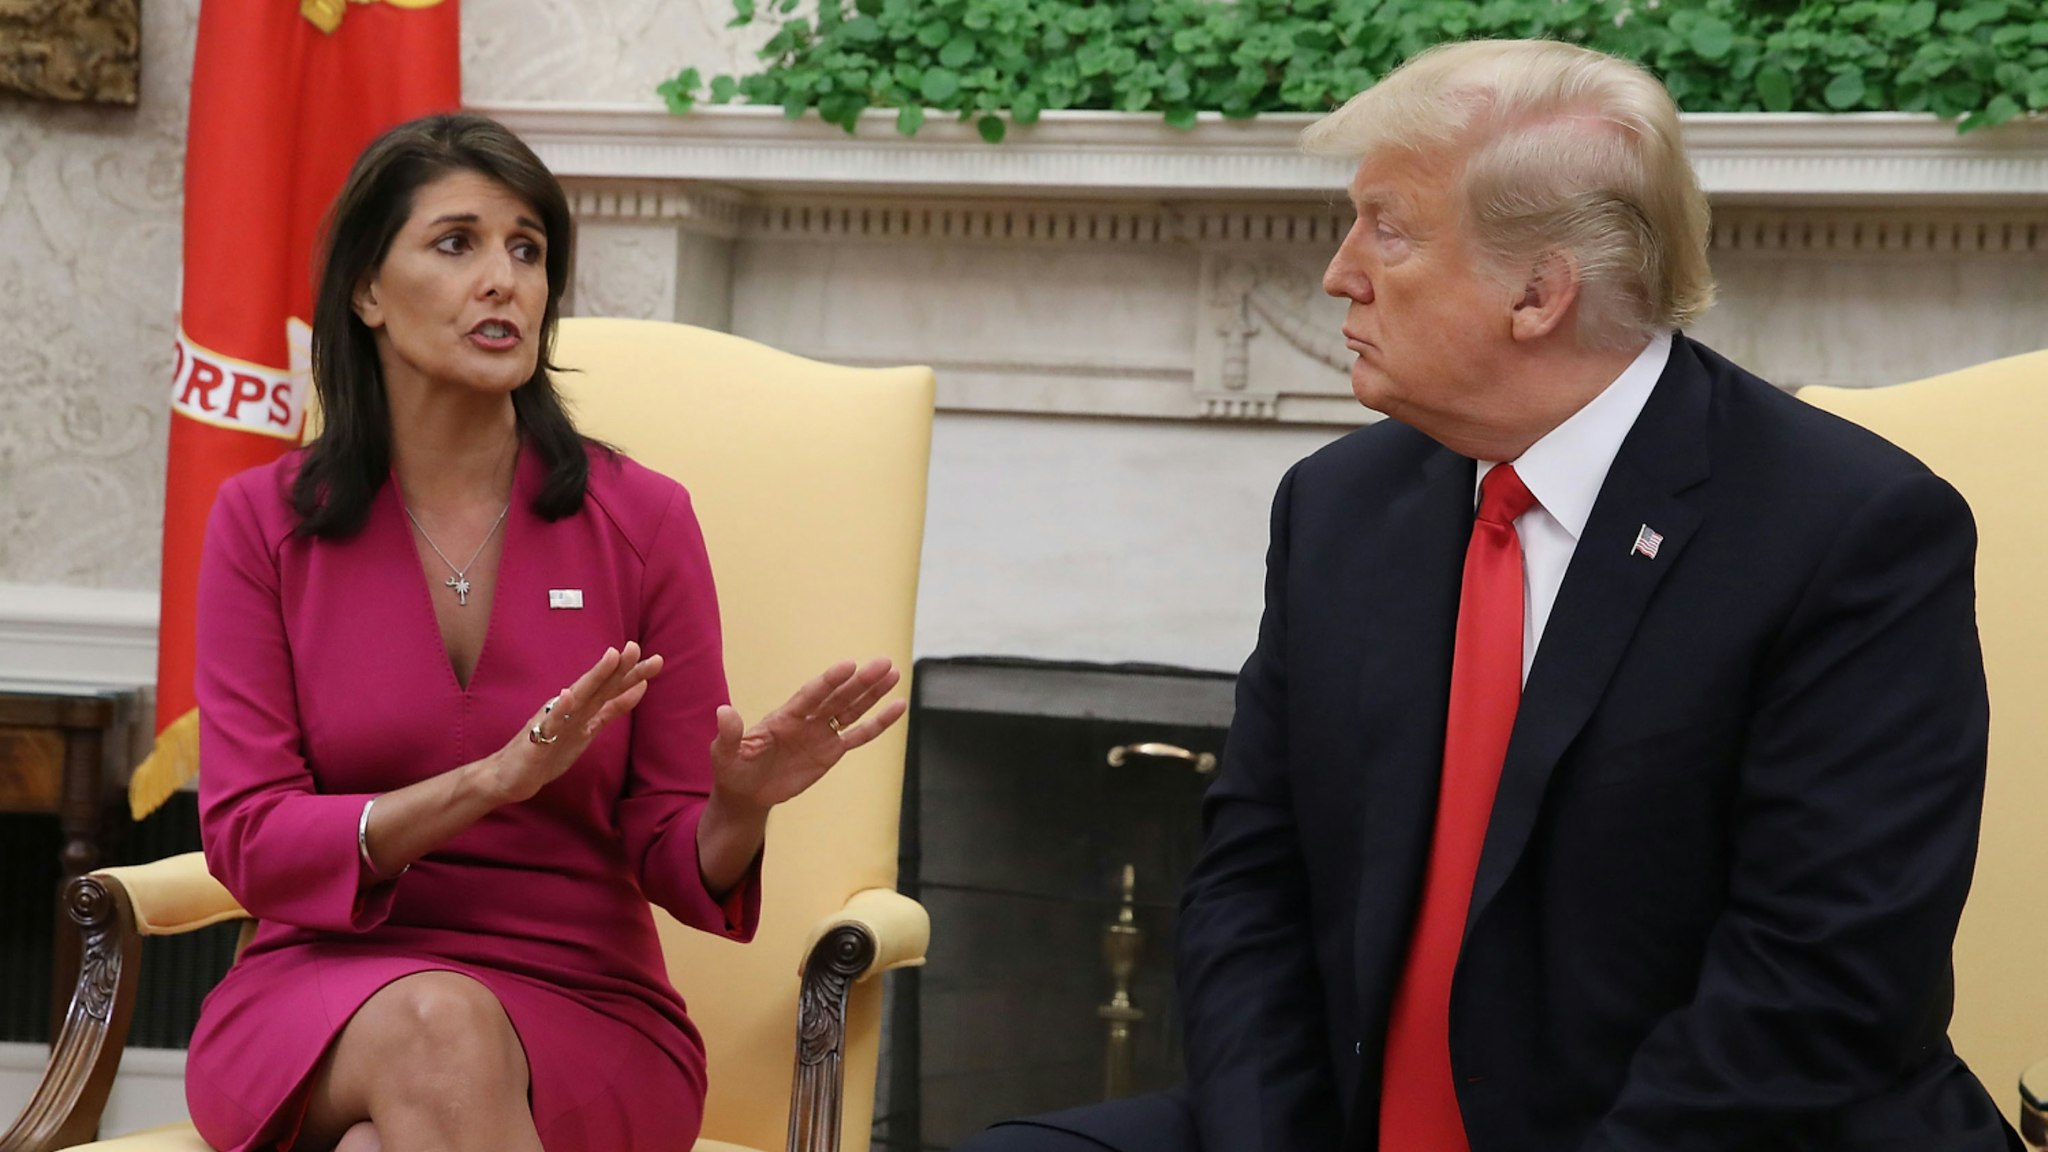 U.S. President Donald Trump announces that he has accepted the resignation of Nikki Haley as US Ambassador to the United Nations, in the Oval Office on October 9, 2018 in Washington, DC.